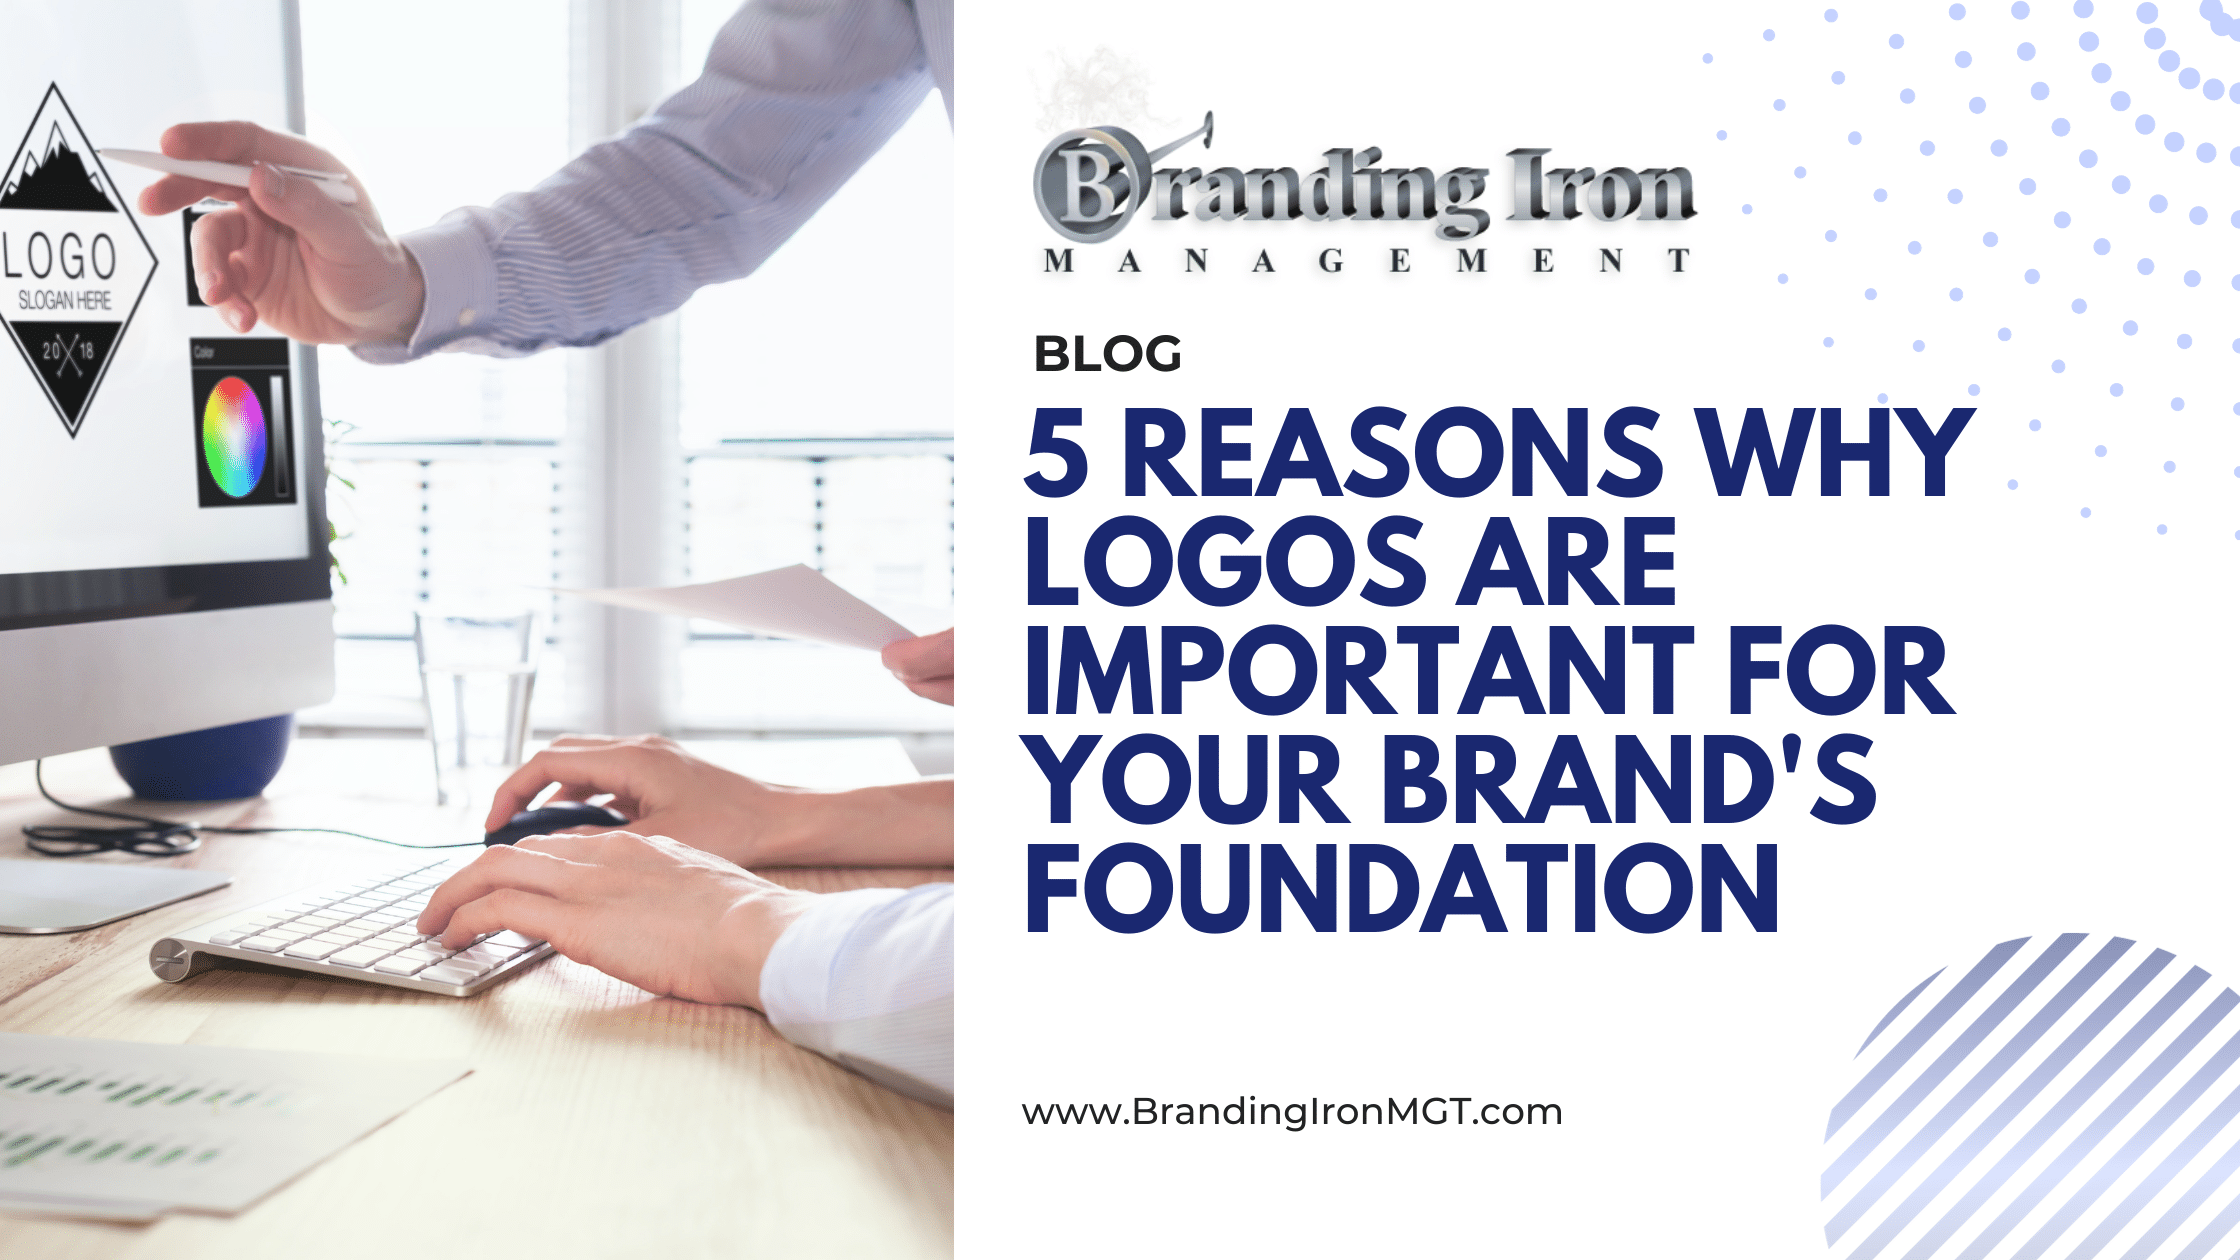 5 Reasons Why Logos Are Important For Your Brand’s Foundation